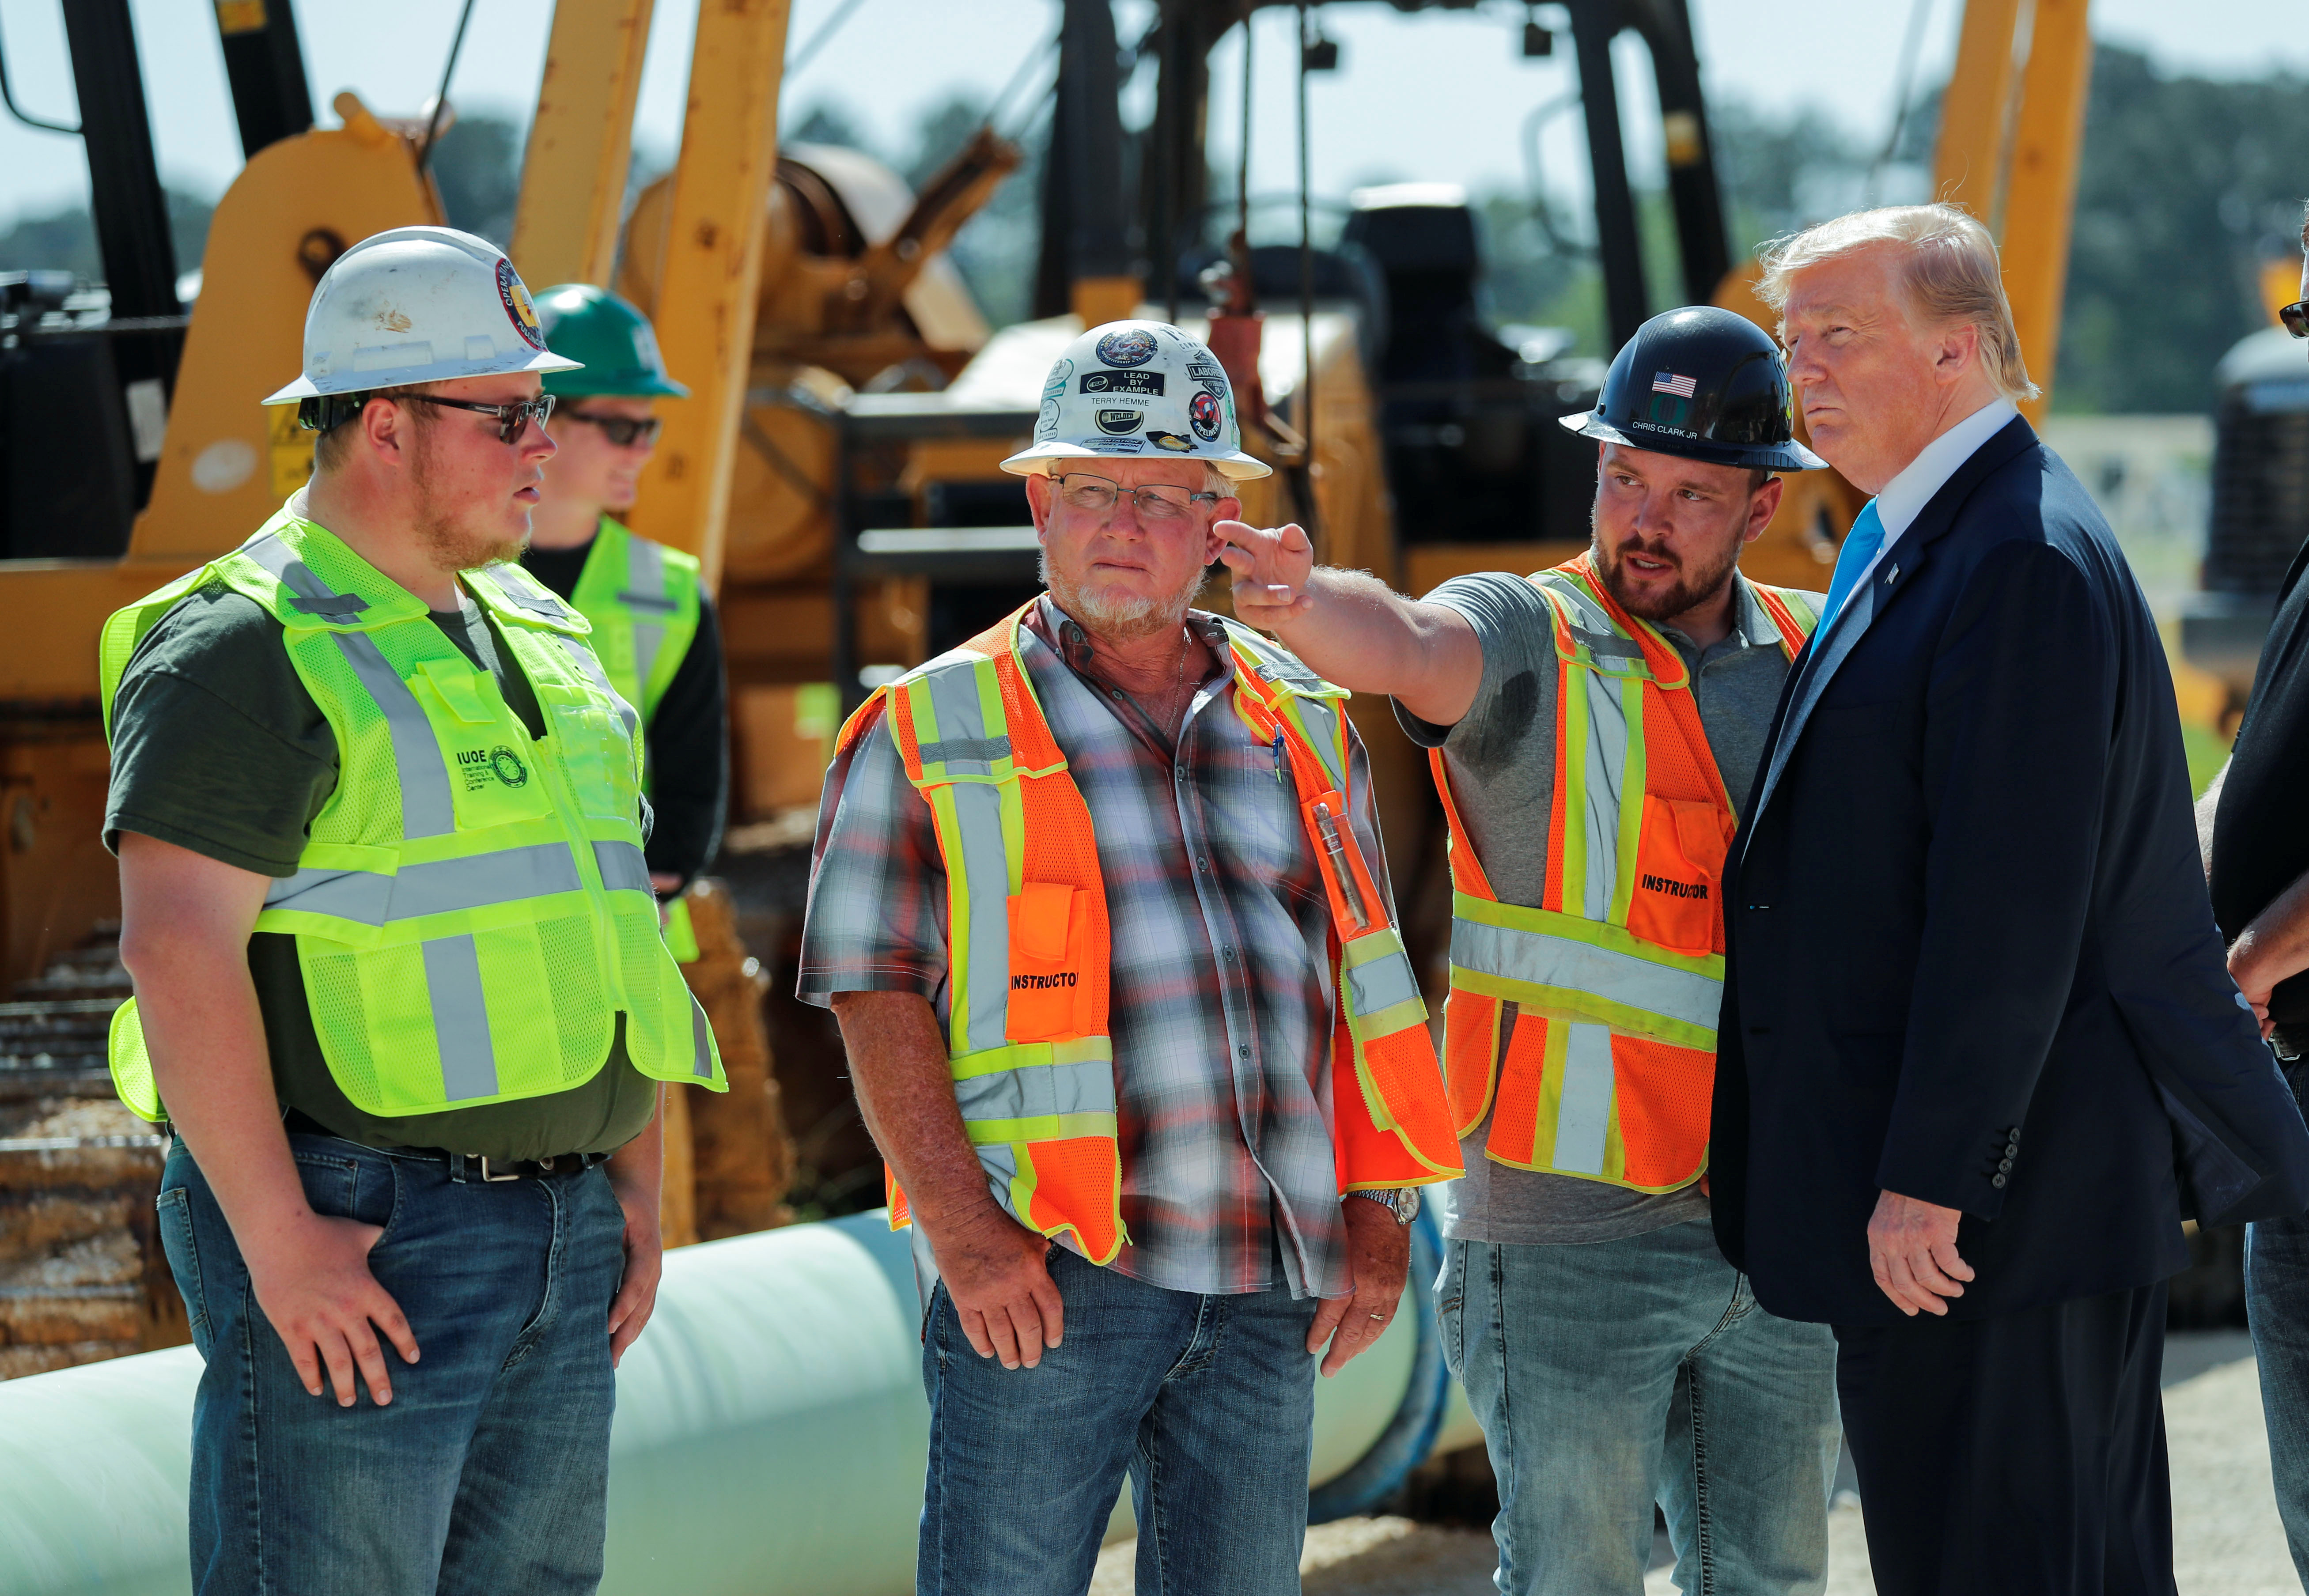 U.S. President Trump talks with workers at the International Union of Operating Engineers International Training and Education Center in Crosby, Texas